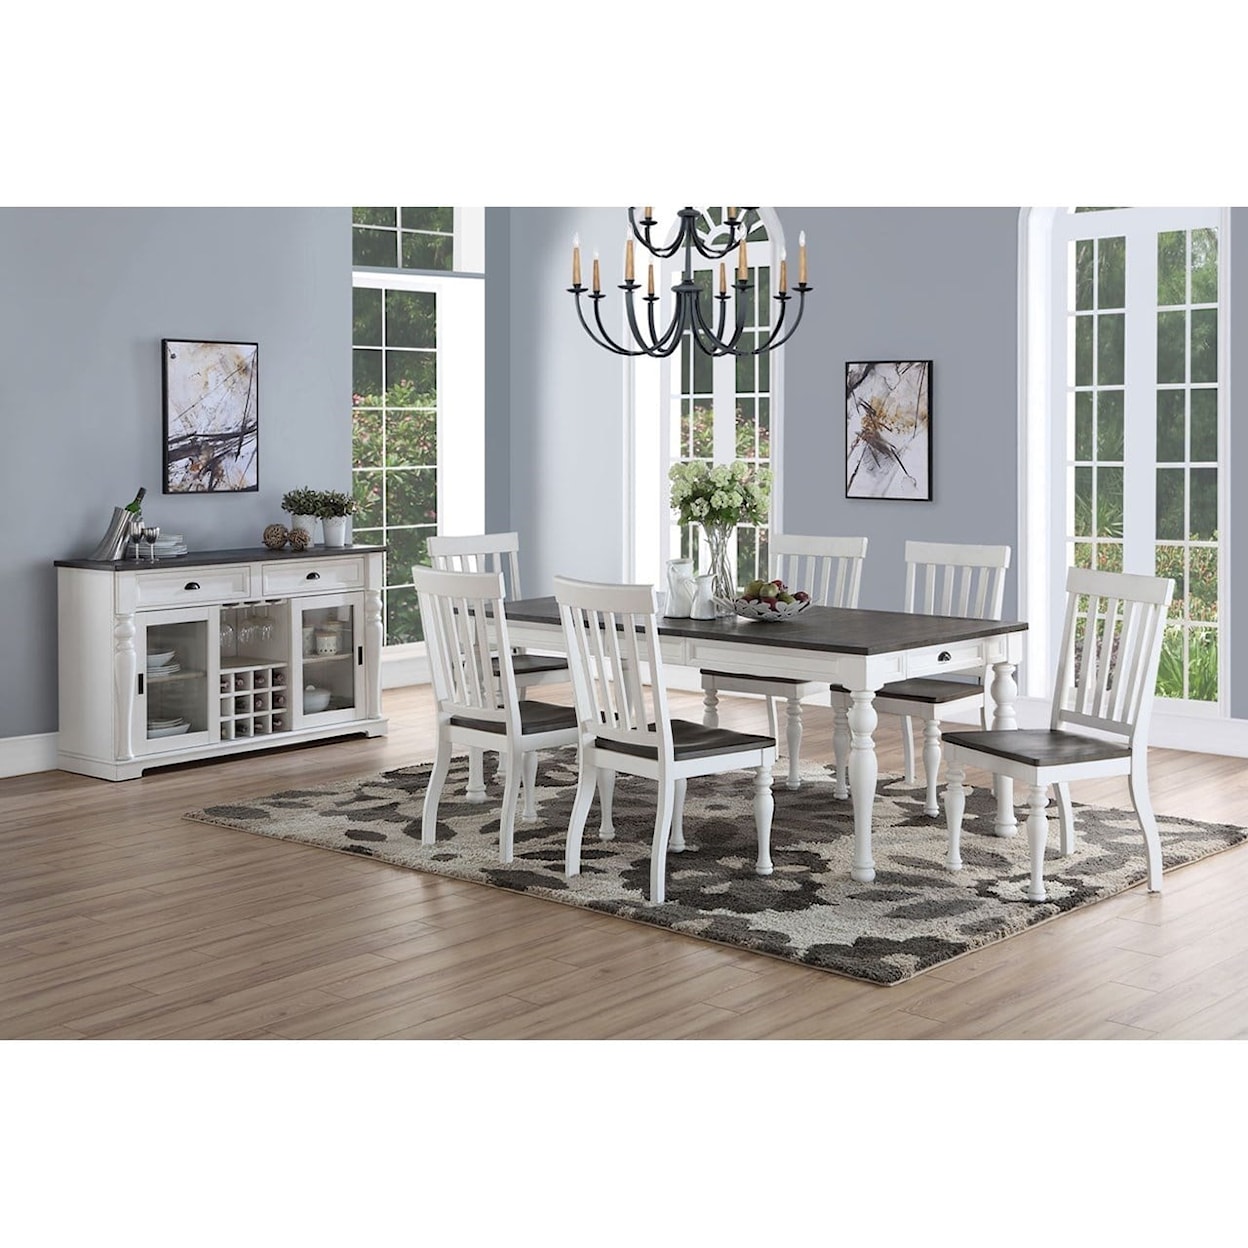 Prime Joanna Dining Side Chair